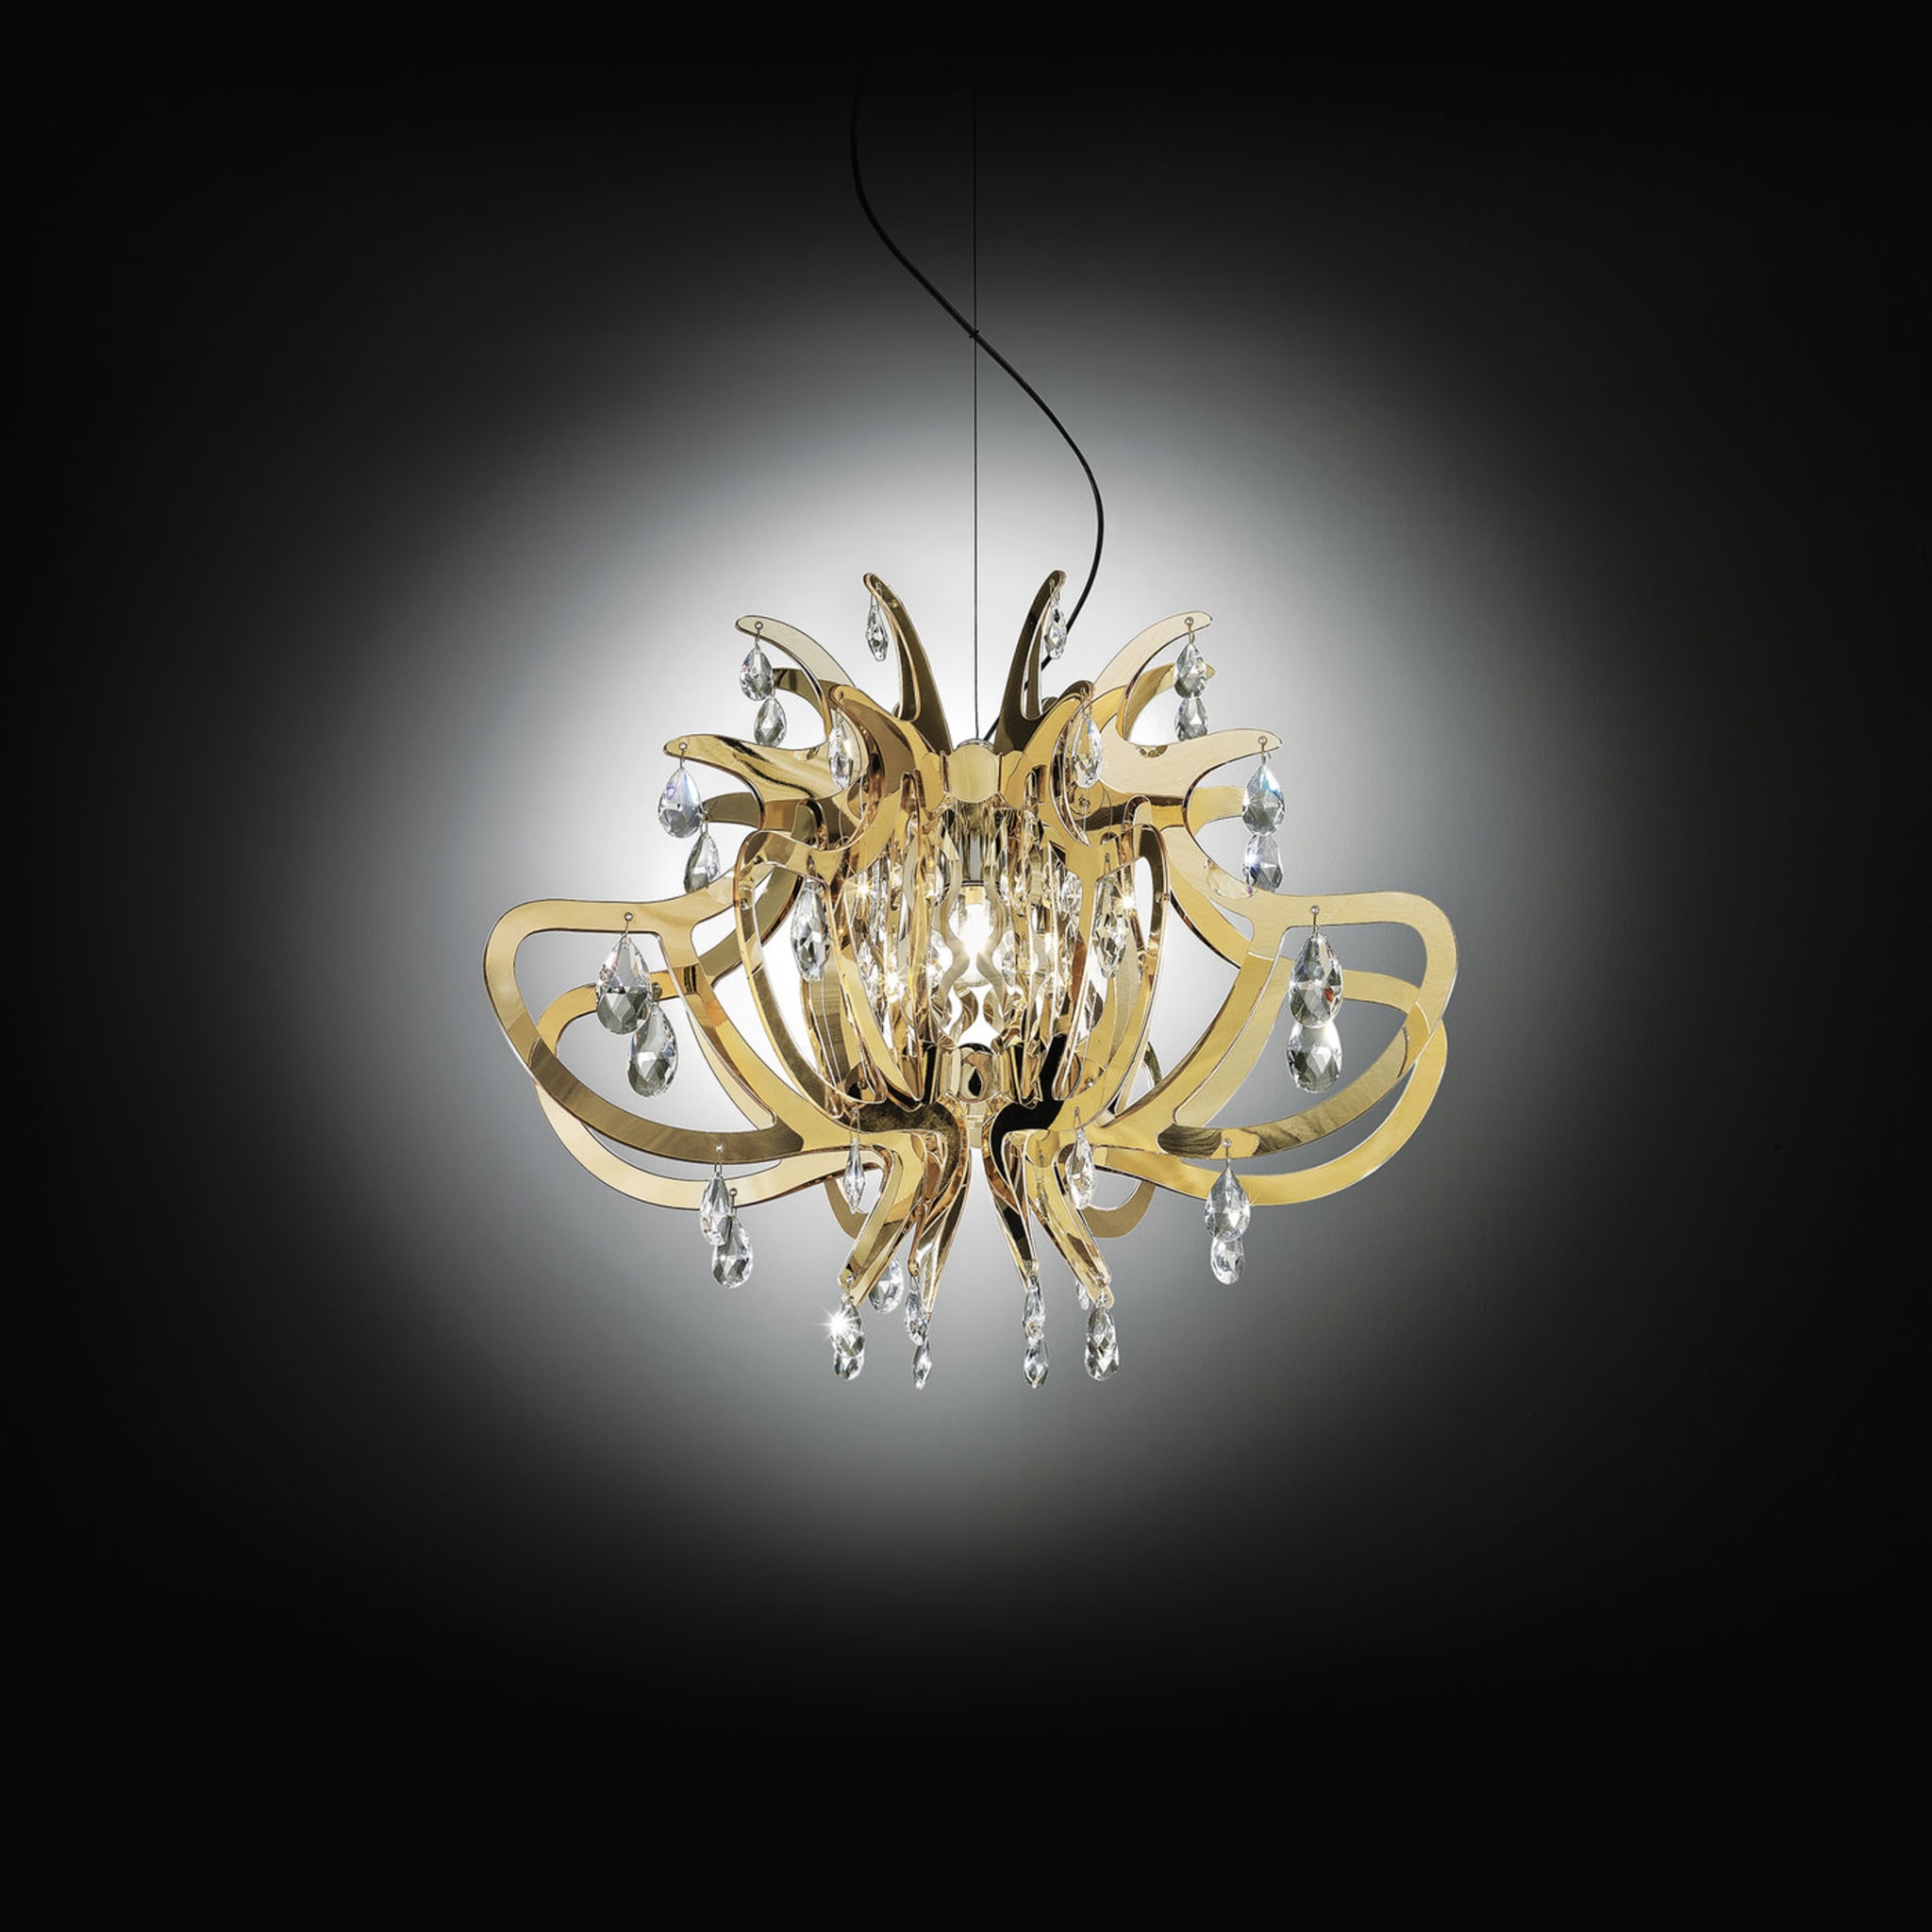 Lillibet Gold Ceiling Lamp by Nigel Coates - Alternative view 2